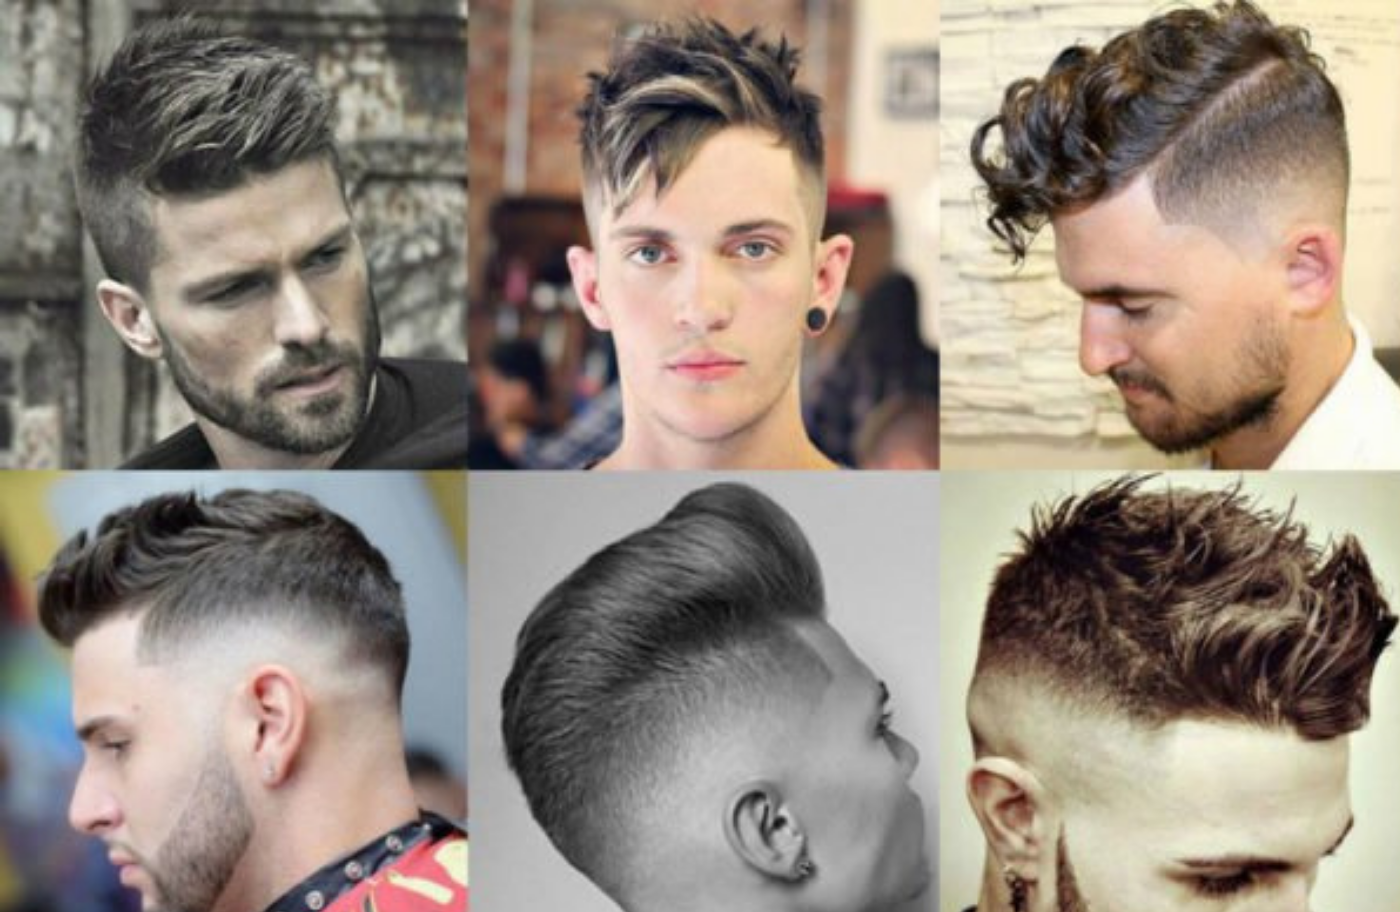 Professional Hairstyles For Men - Top 9 Styles That You Must Consider!